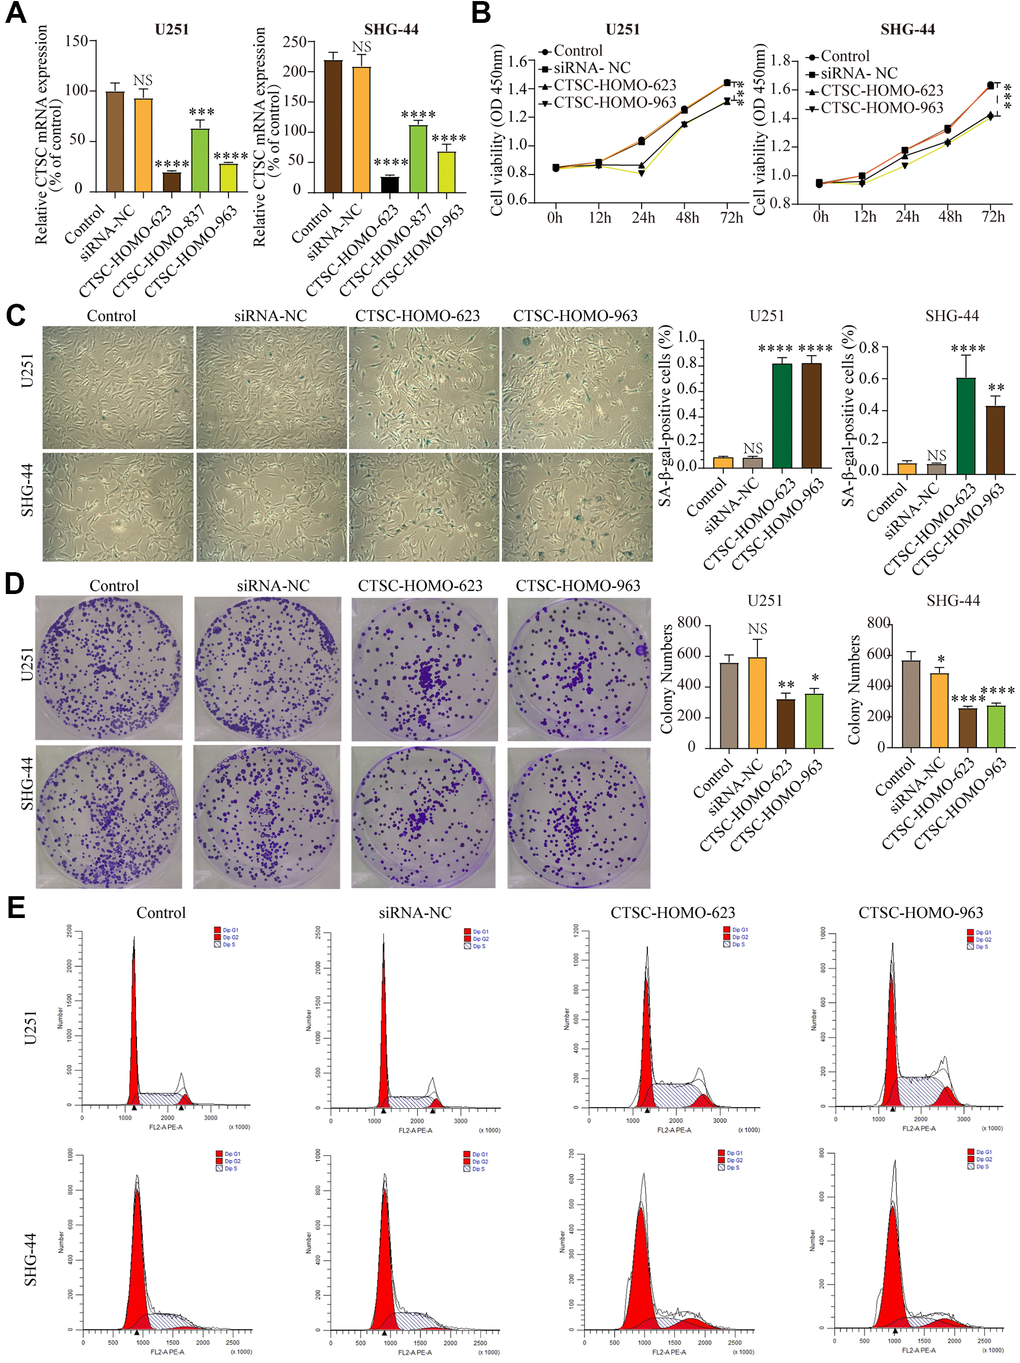 (A) The expression levels of CTSC mRNA decreased after siRNA transfection in SHG-44 and U251 cells. (B) CCK-8 assays showed that inhibition of CTSC suppressed proliferation of SHG-44 and U251 cells. (C) Numbers and images of positive SA-b-gal staining cells in control, siRNA-NC, CTSC-inhibition cells are shown. (D) Images and histograms showing colony formation and numbers in the SHG-44 and U251 cells. (E) Diagrams showing the percentage distribution of SHG-44 and U251 cells stained with PI in the different phases of the cell cycle. (siRNA-NC, siRNA negative control, NS, p>0.05, * p 